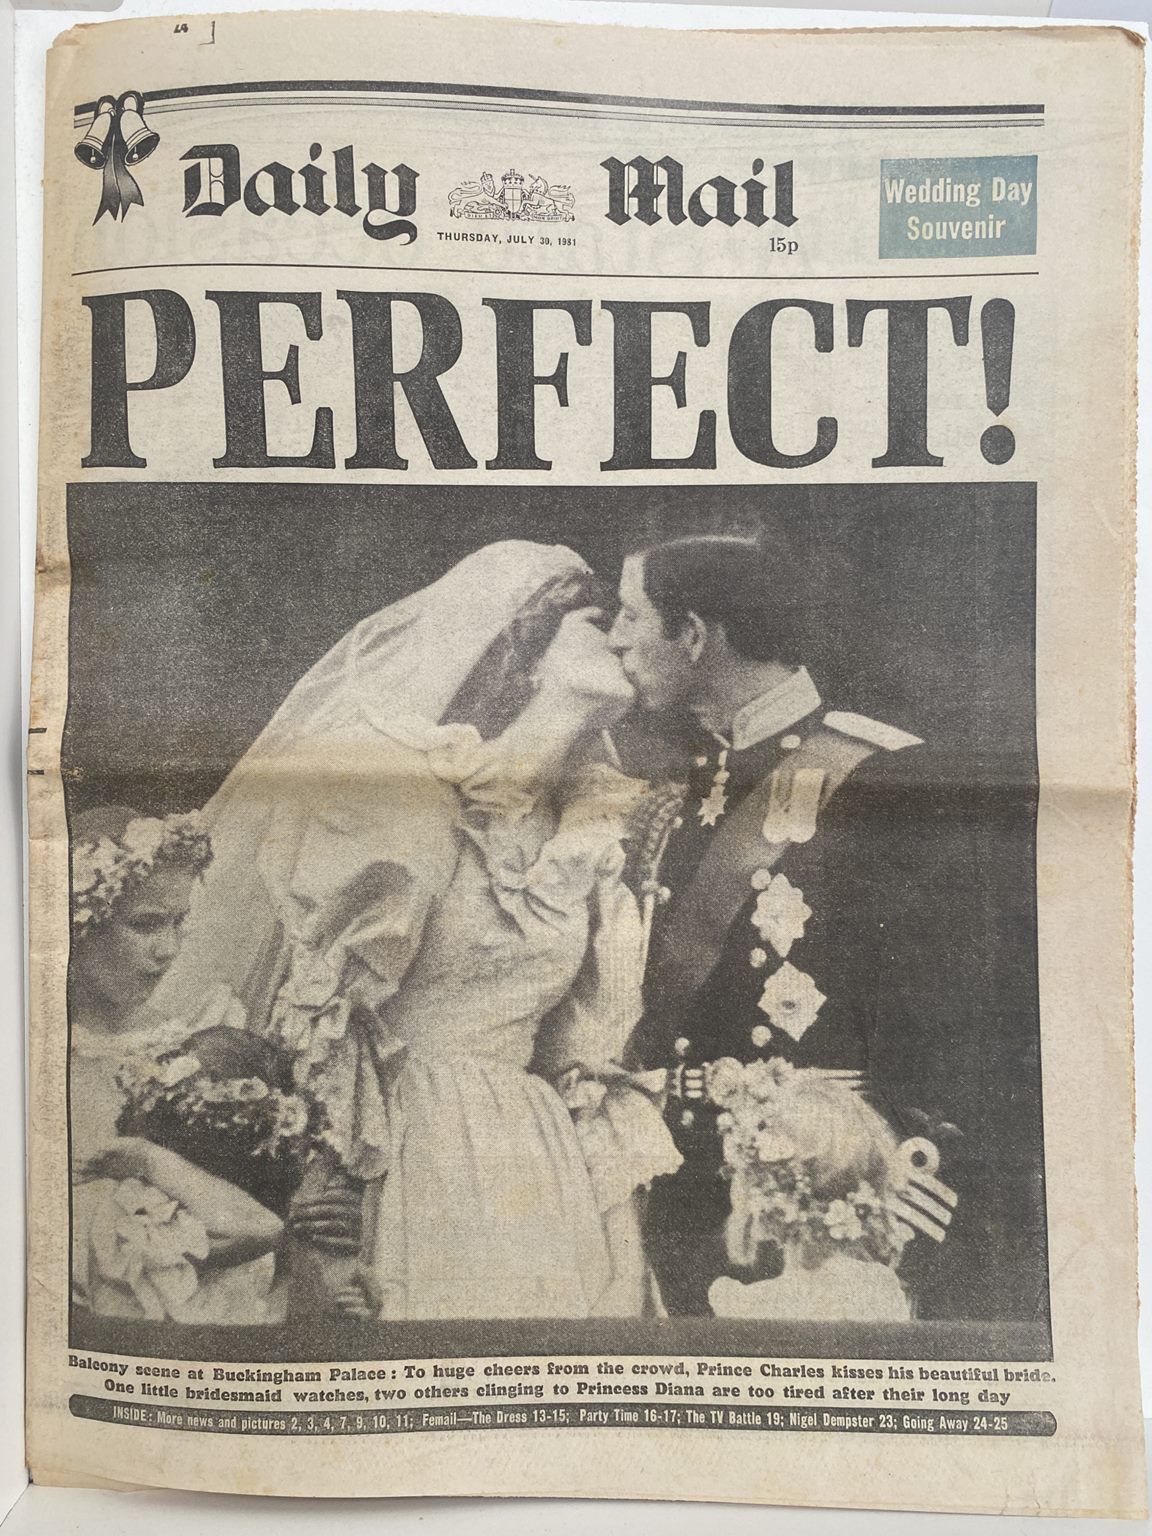 OLD NEWSPAPER: Daily Mail, 30 July 1981 - Charles and Diana Royal wedding